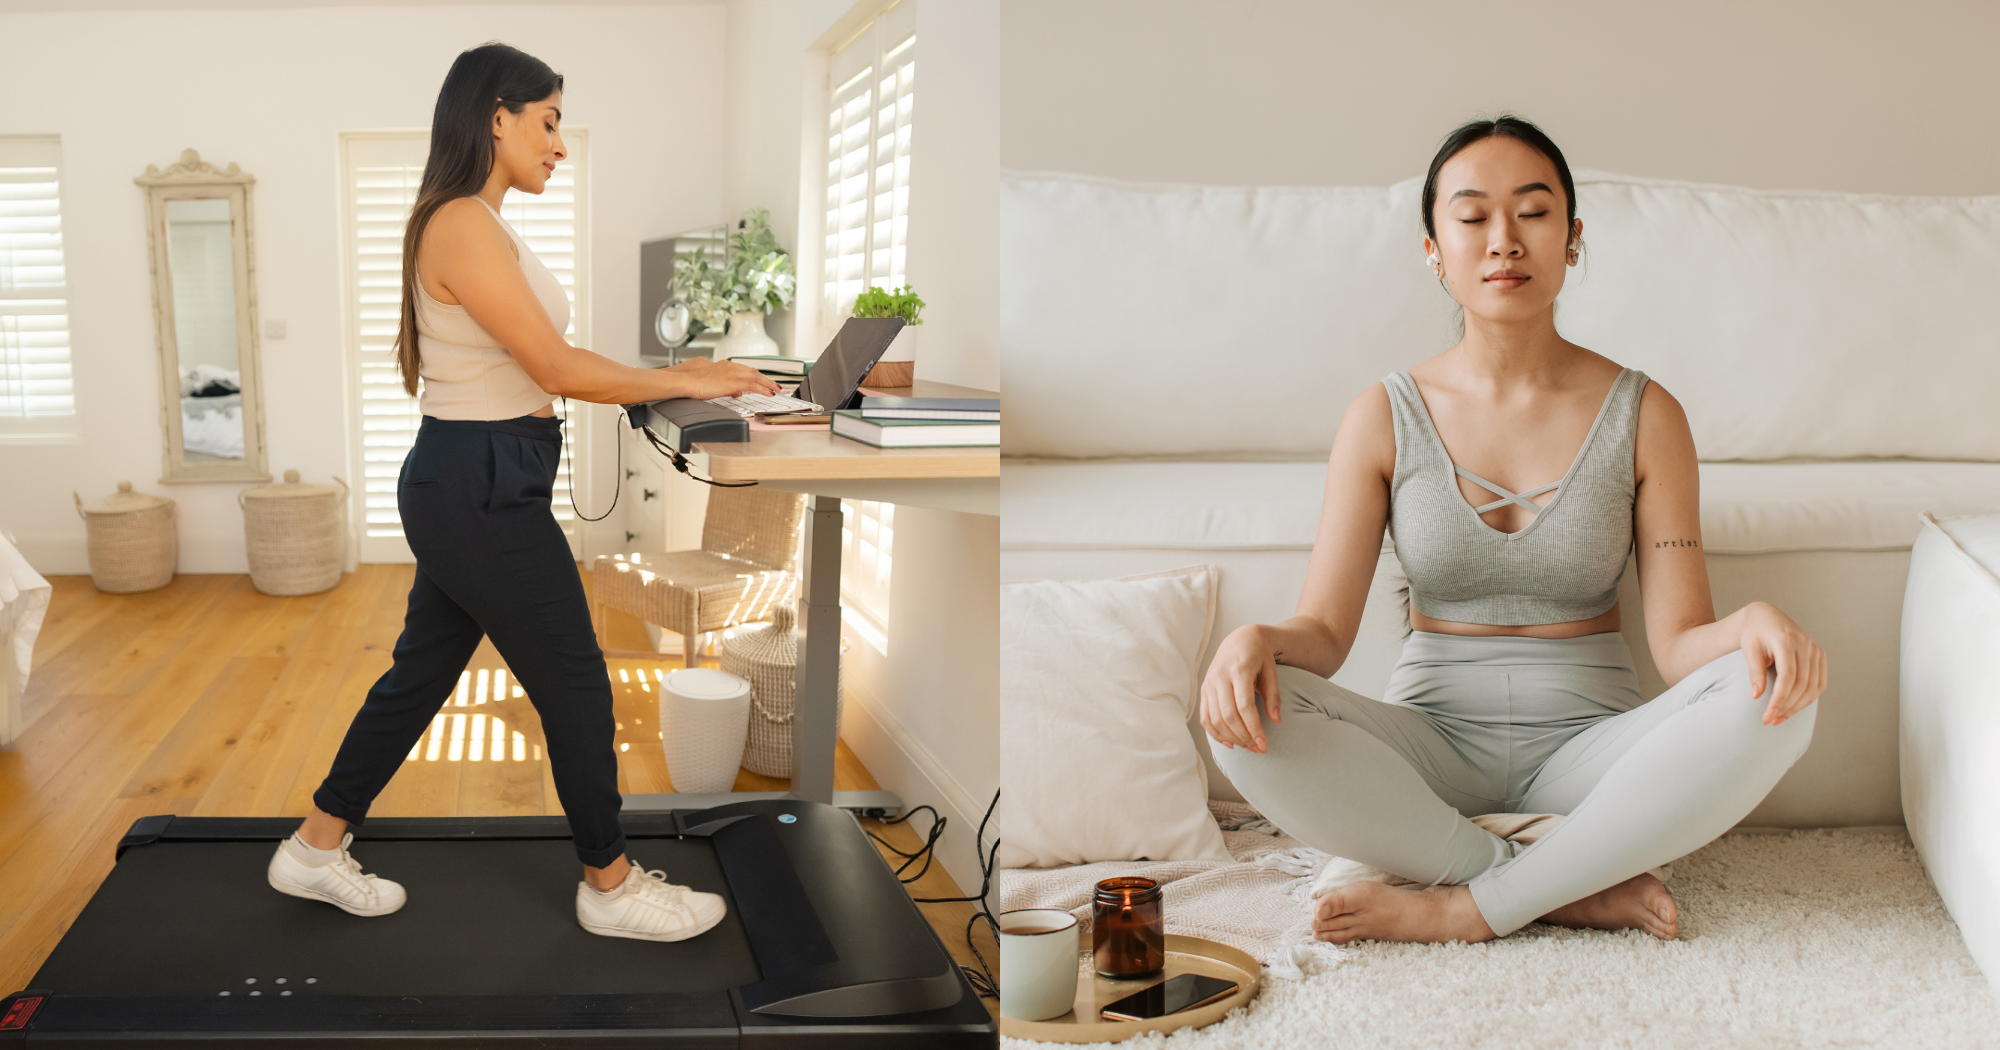 Two females demonstrating 'habit stacking'. One is using a walking pad whilst working, the other is meditating with her morning coffee.